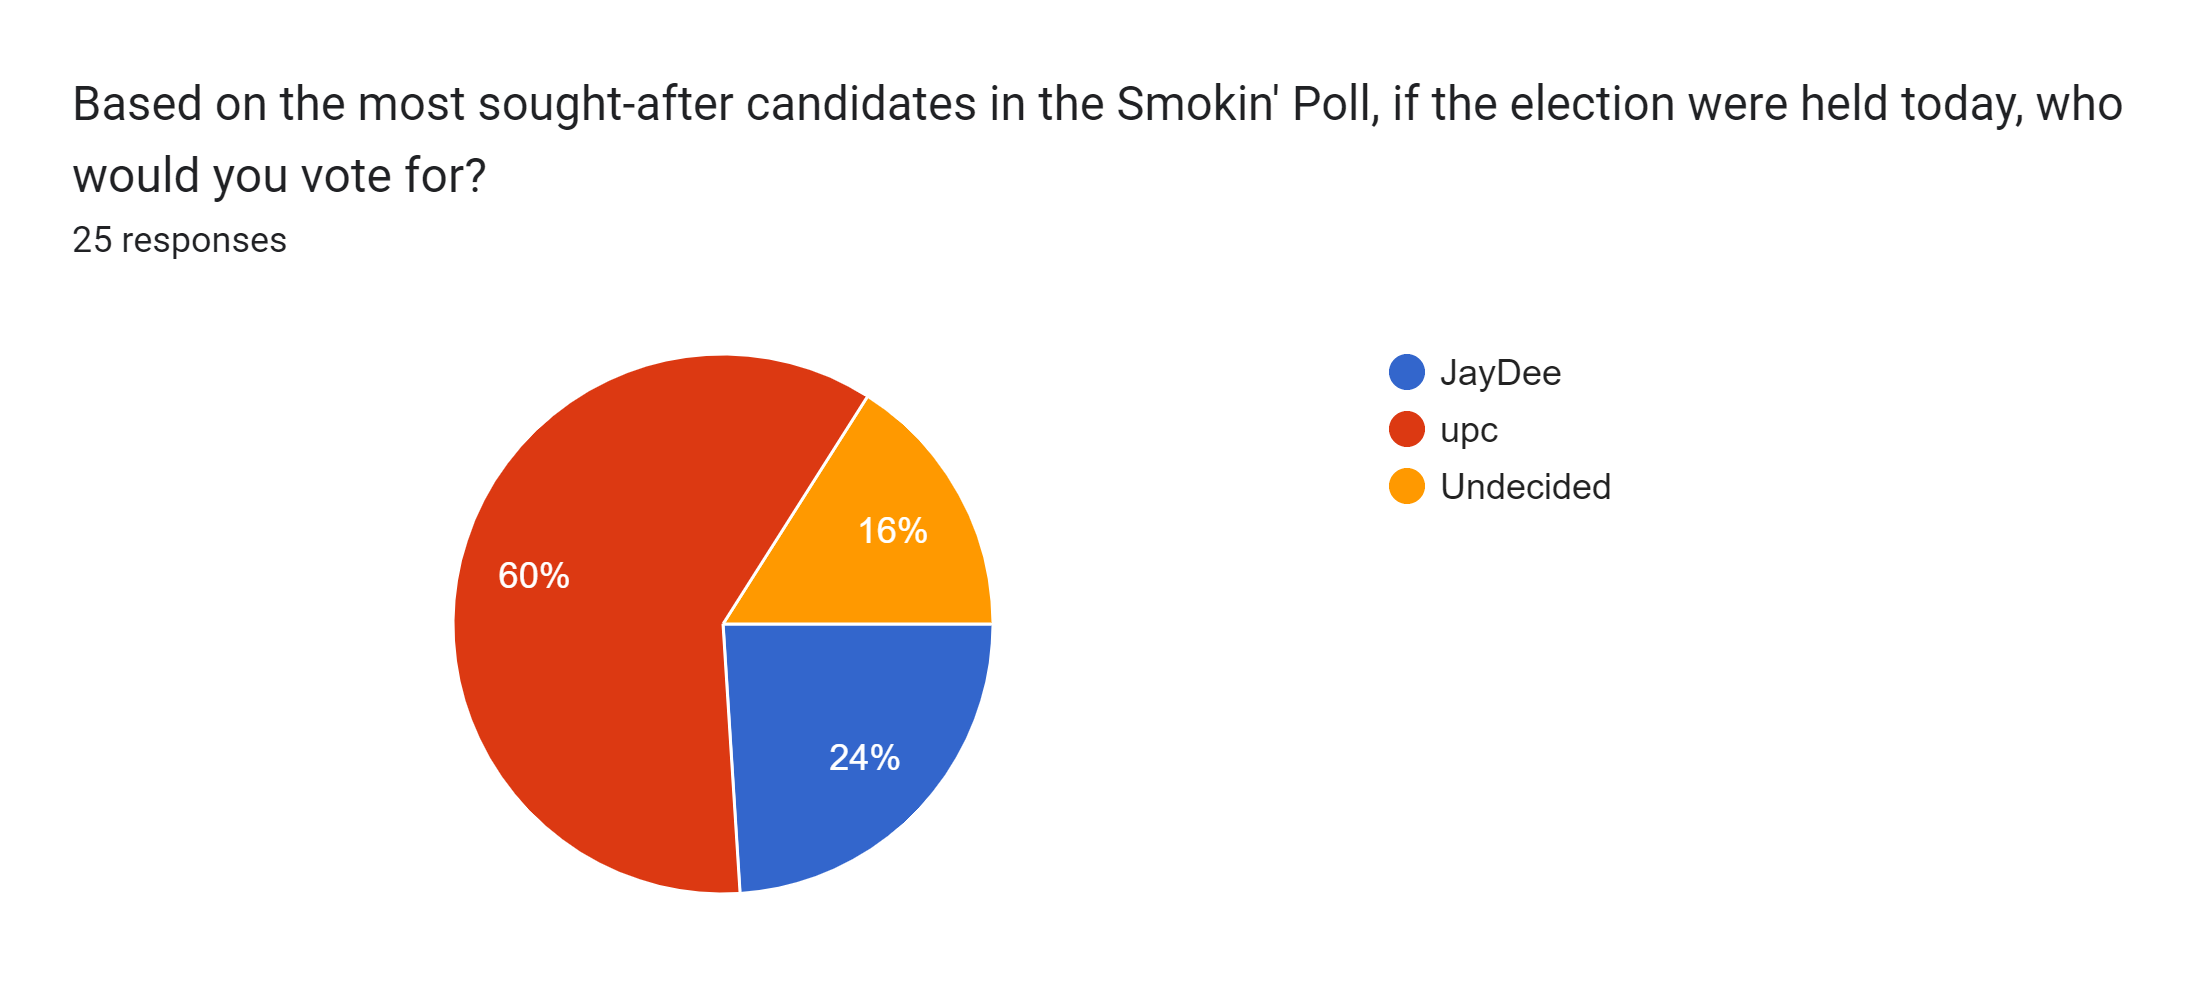 Forms response chart. Question title: Based on the most sought-after candidates in the Smokin' Poll, if the election were held today, who would you vote for?. Number of responses: 25 responses.